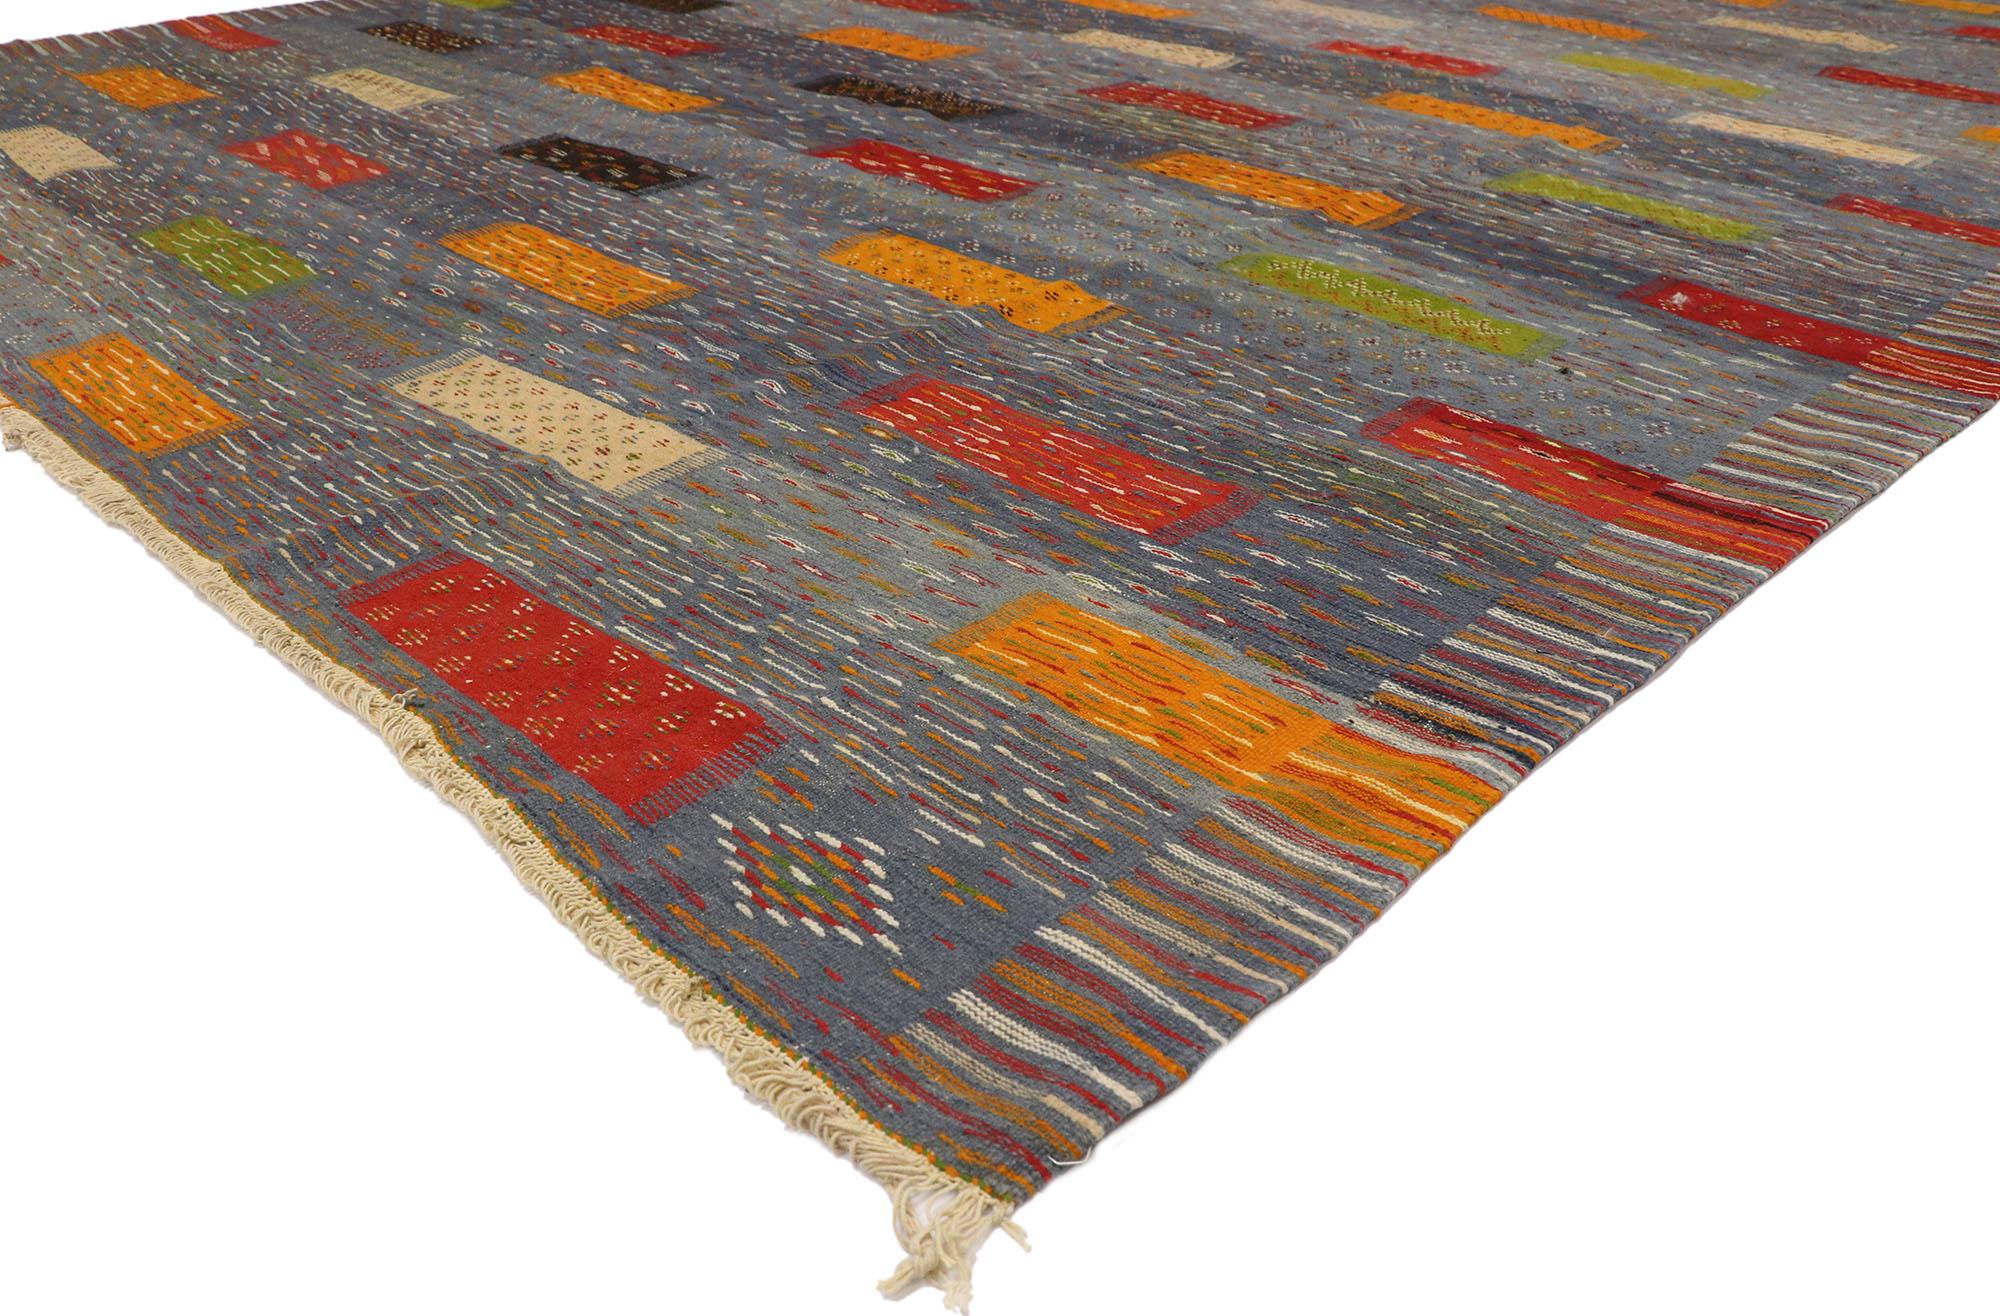 20911, new contemporary Berber Moroccan Kilim rug, modern cabin style flat-weave rug 09'10 x 13'06. With its bold expressive design, incredible detail and texture, this contemporary Berber Moroccan Kilim rug is a captivating vision of woven beauty.